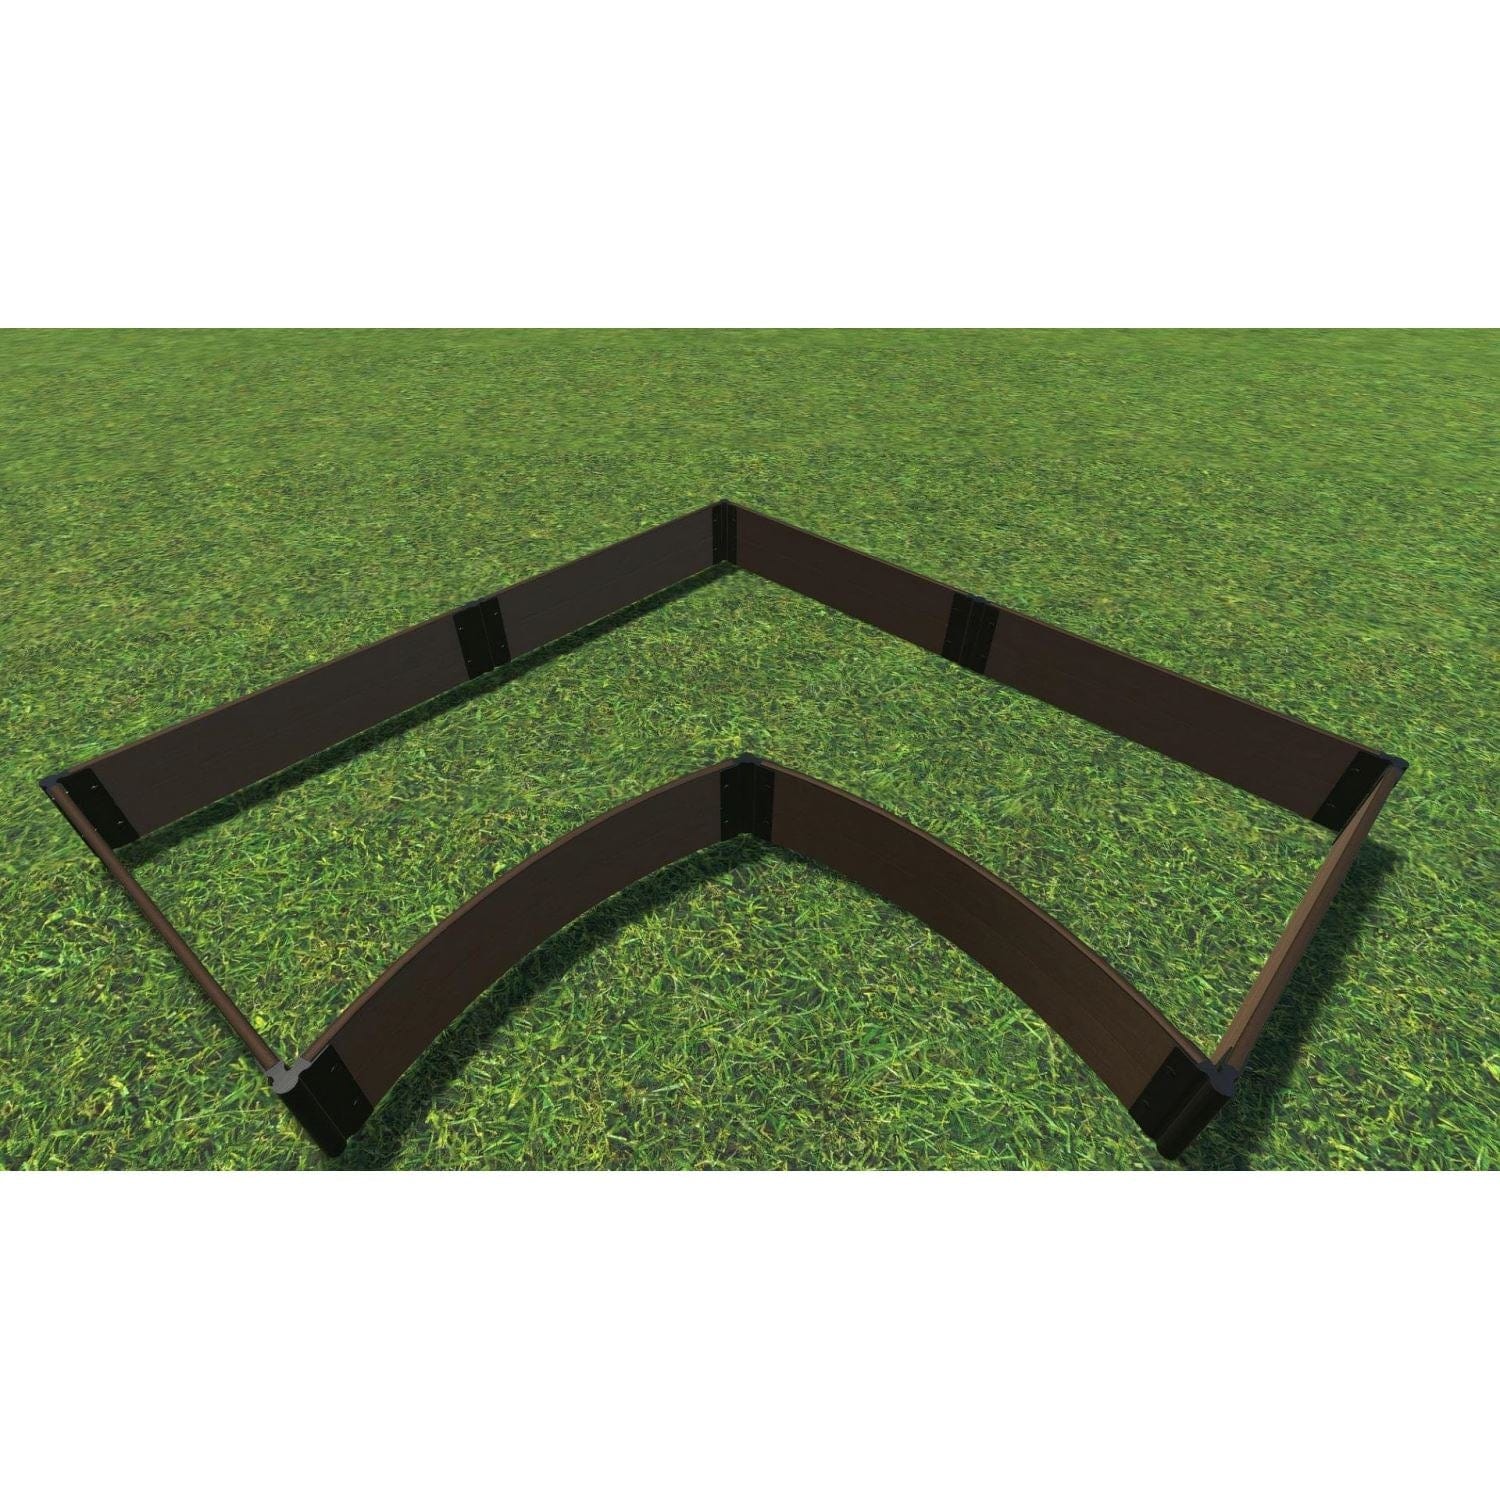 Frame It All Gardening Accessories Frame It All | Tool-Free Grand Concourse Interior Curved Corner Raised Garden Bed 8' X 8' X 11" - Uptown Brown - 1" Profile 800002028